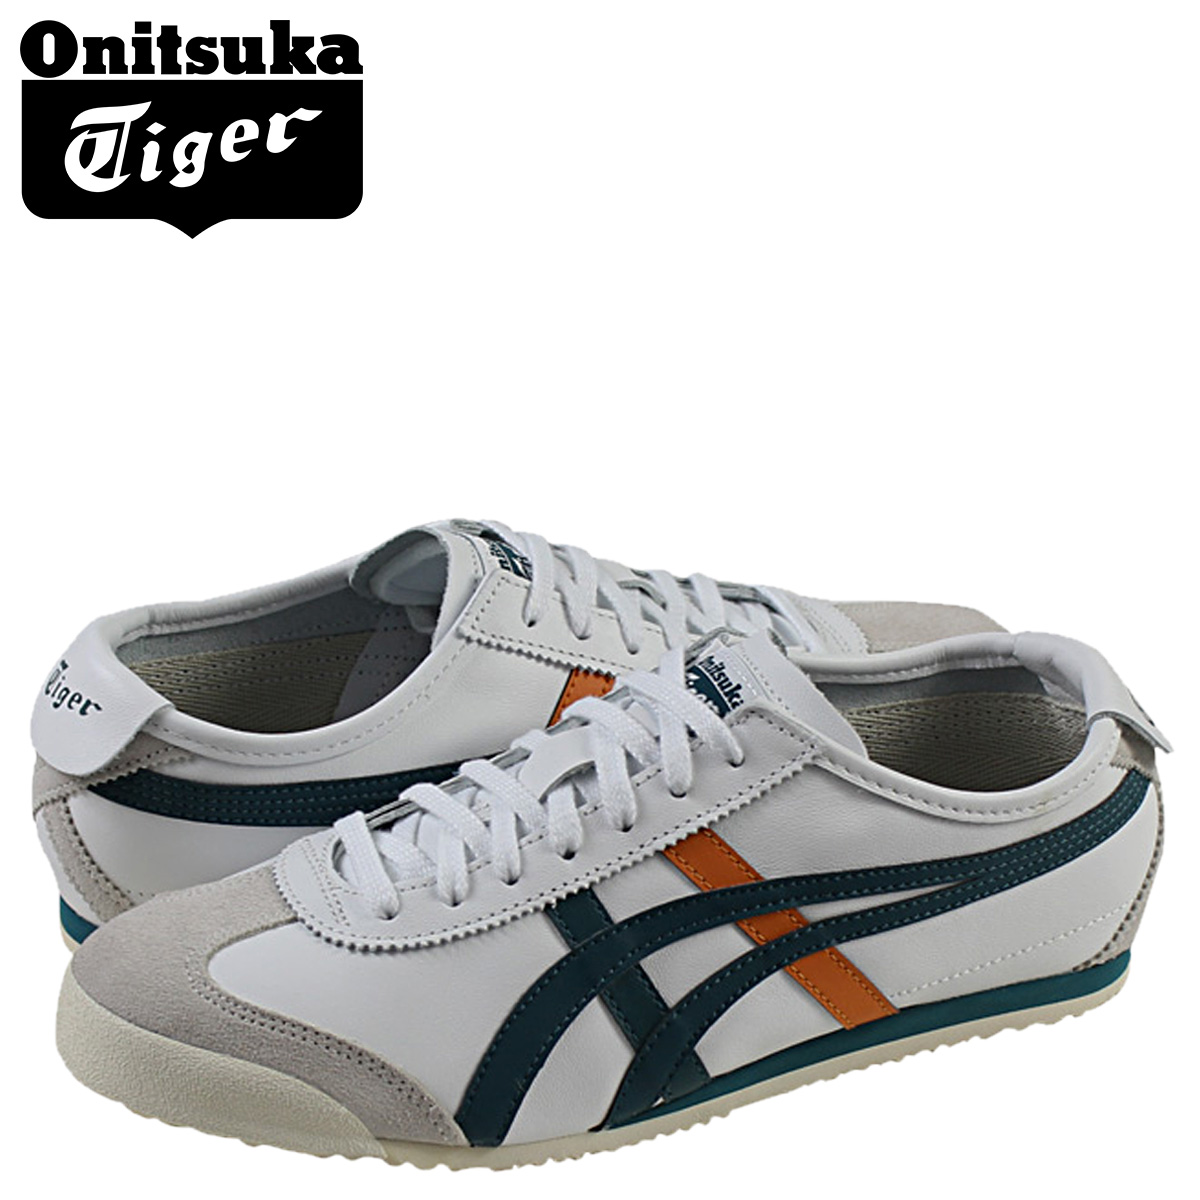 difference between asics tiger and onitsuka tiger